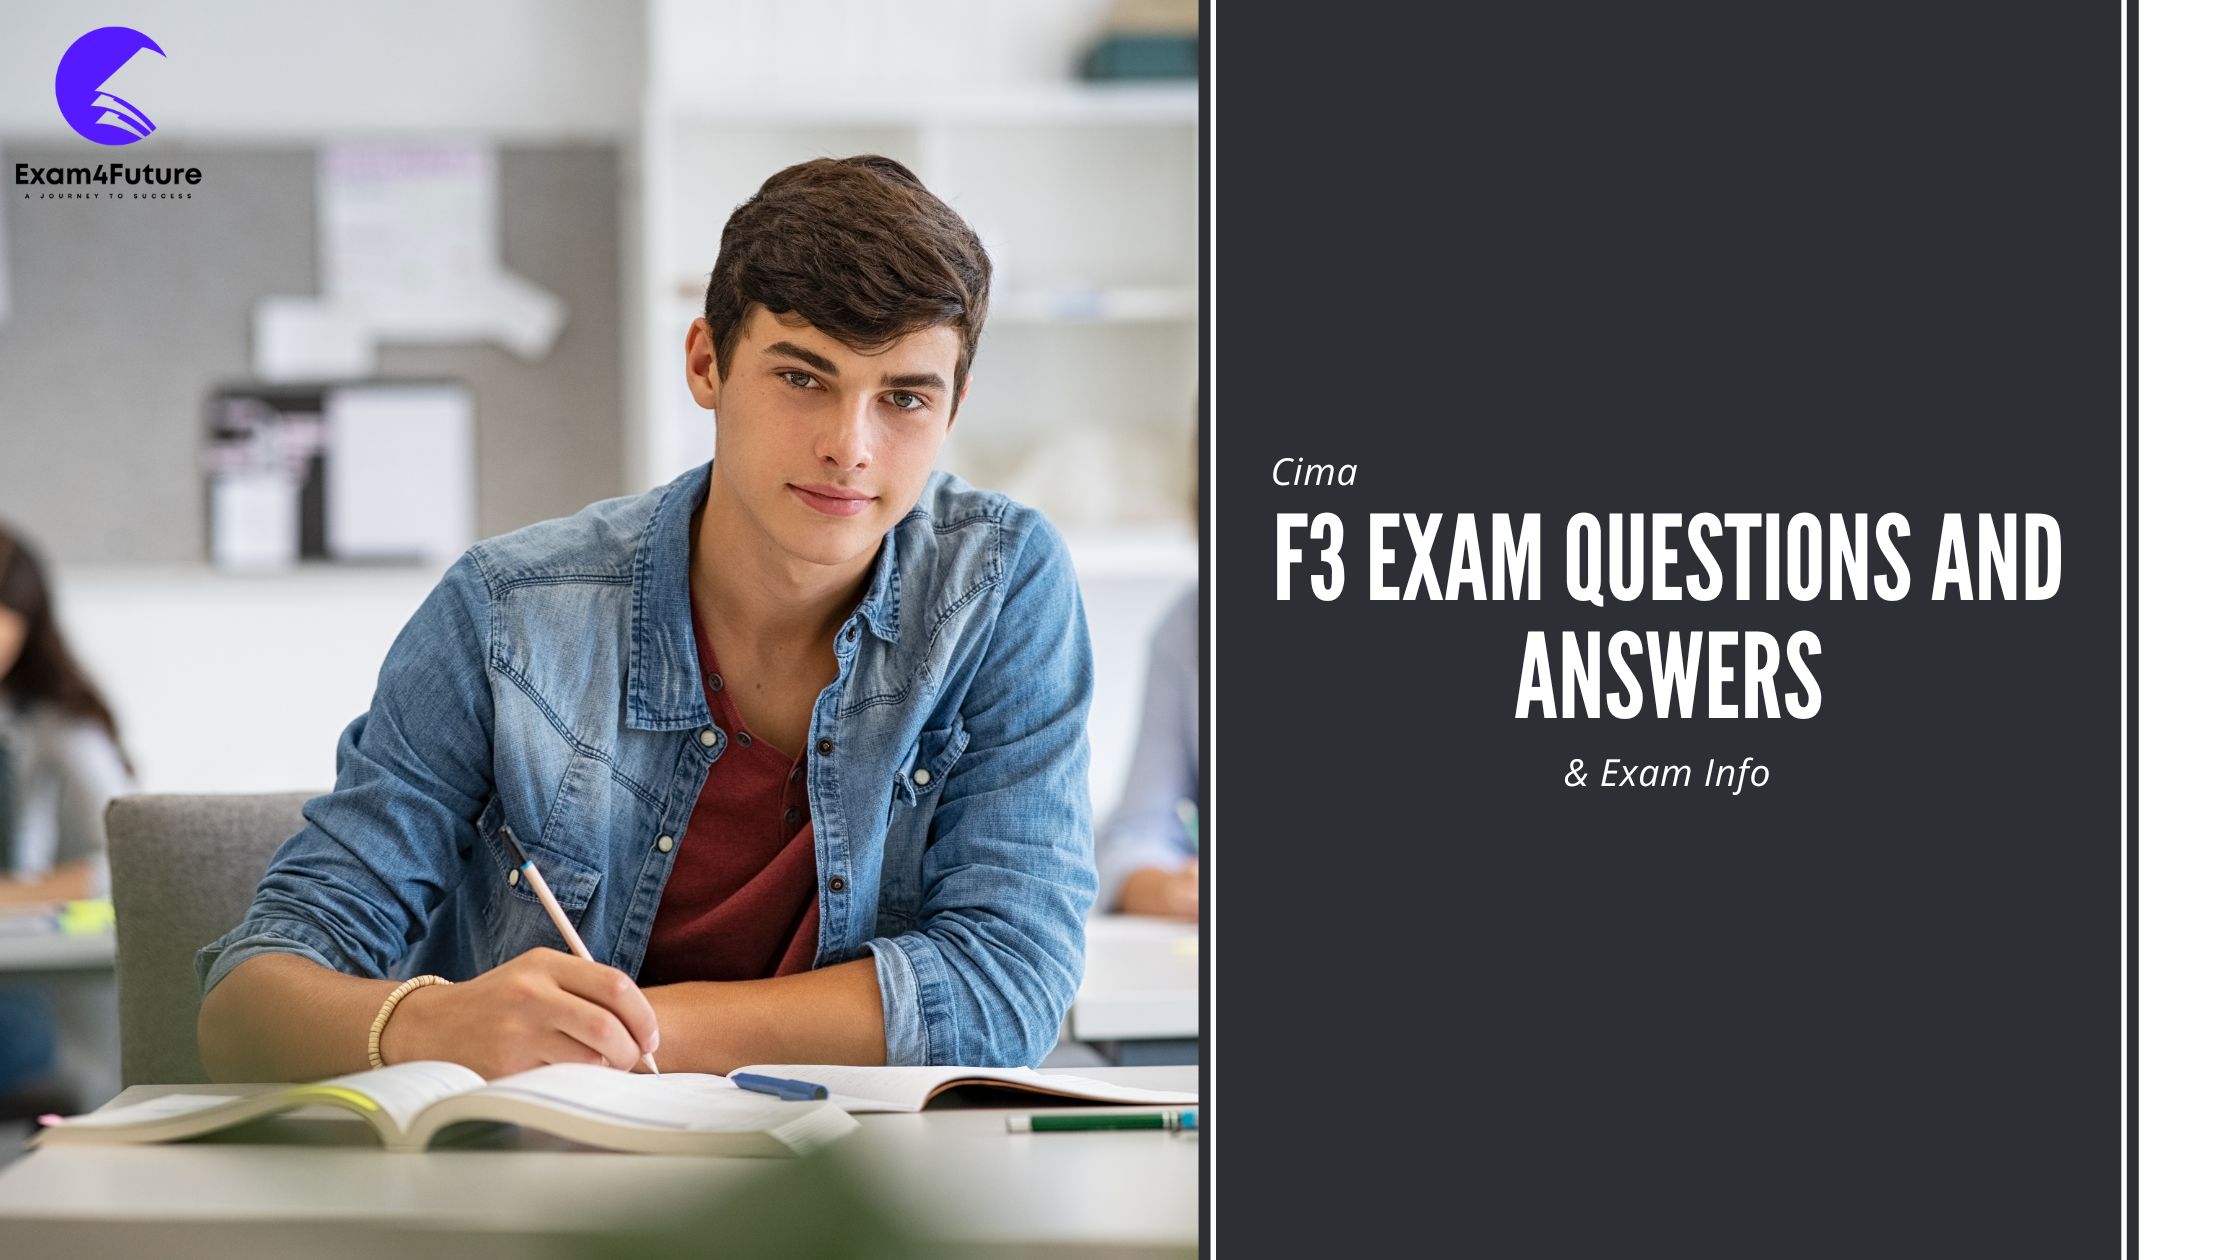 F3 Exam Questions and Answers